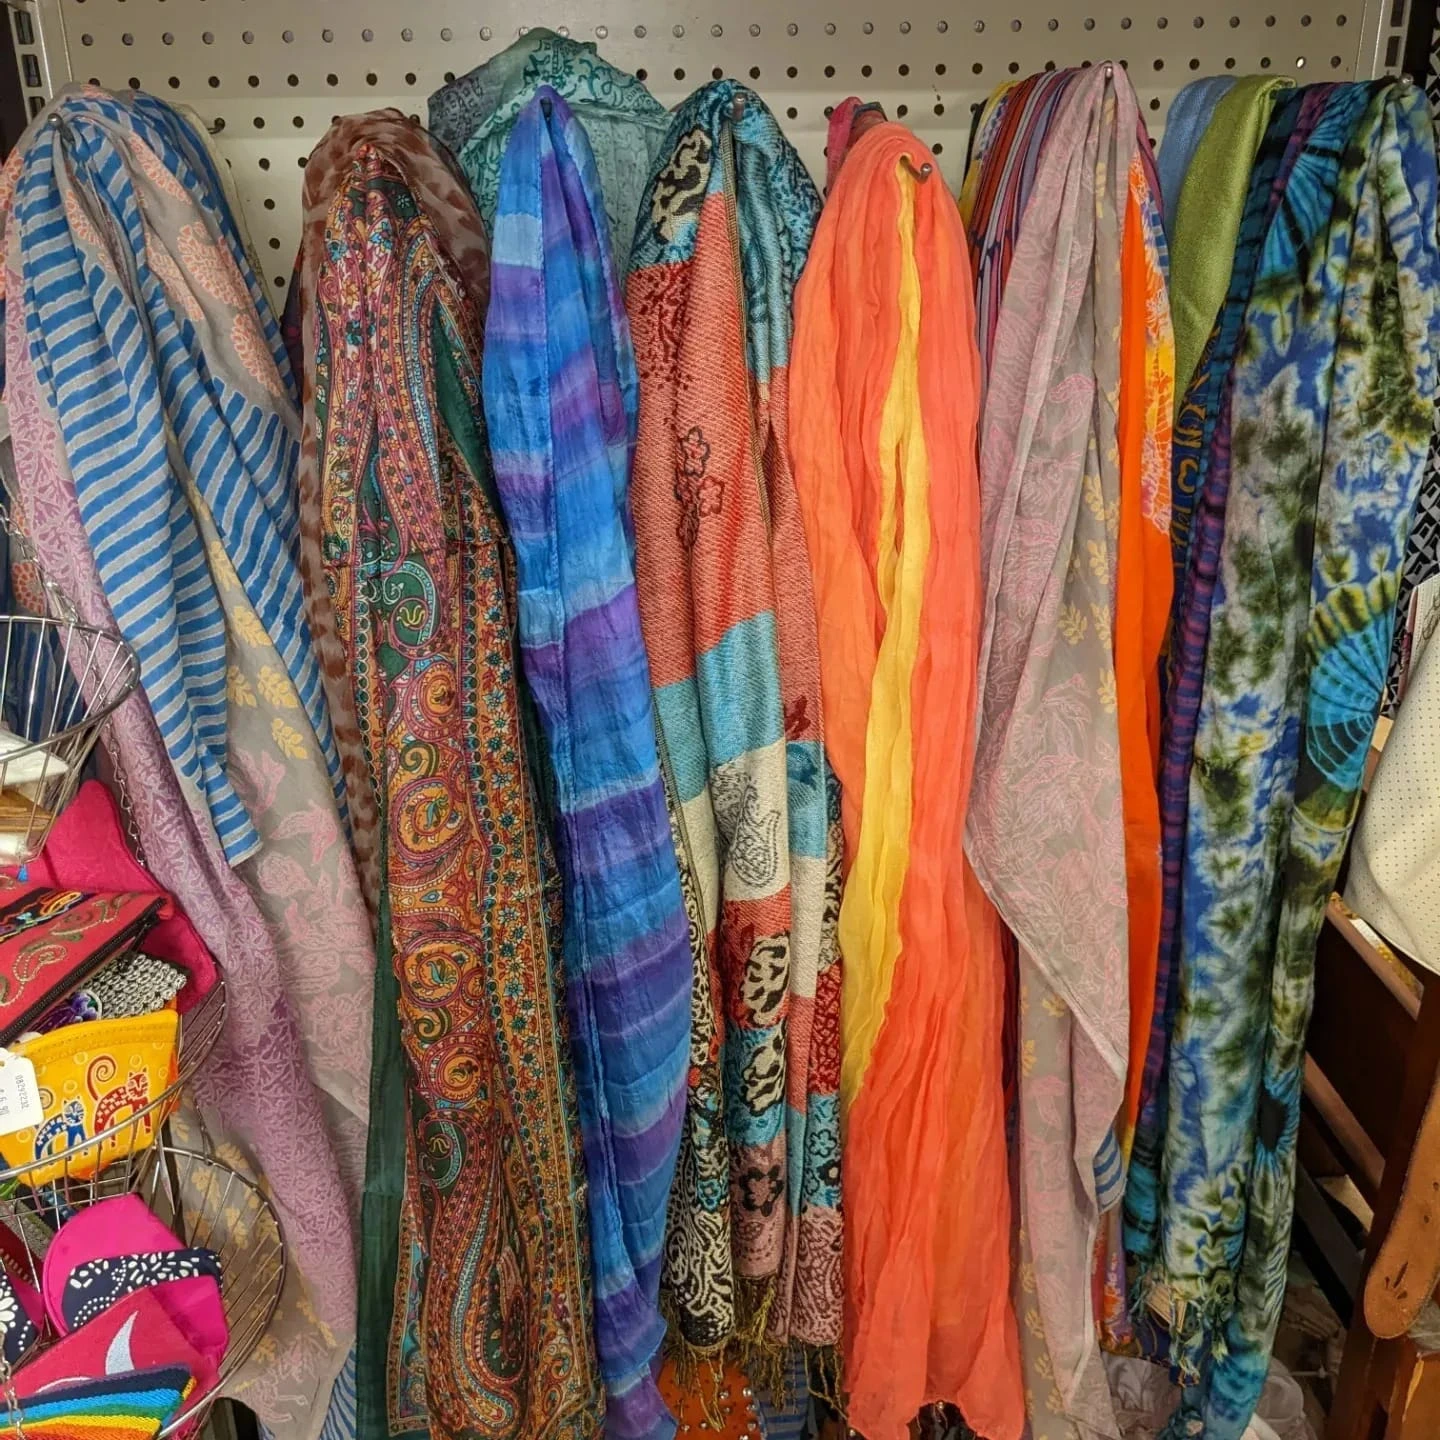 A display of multicolored scarves